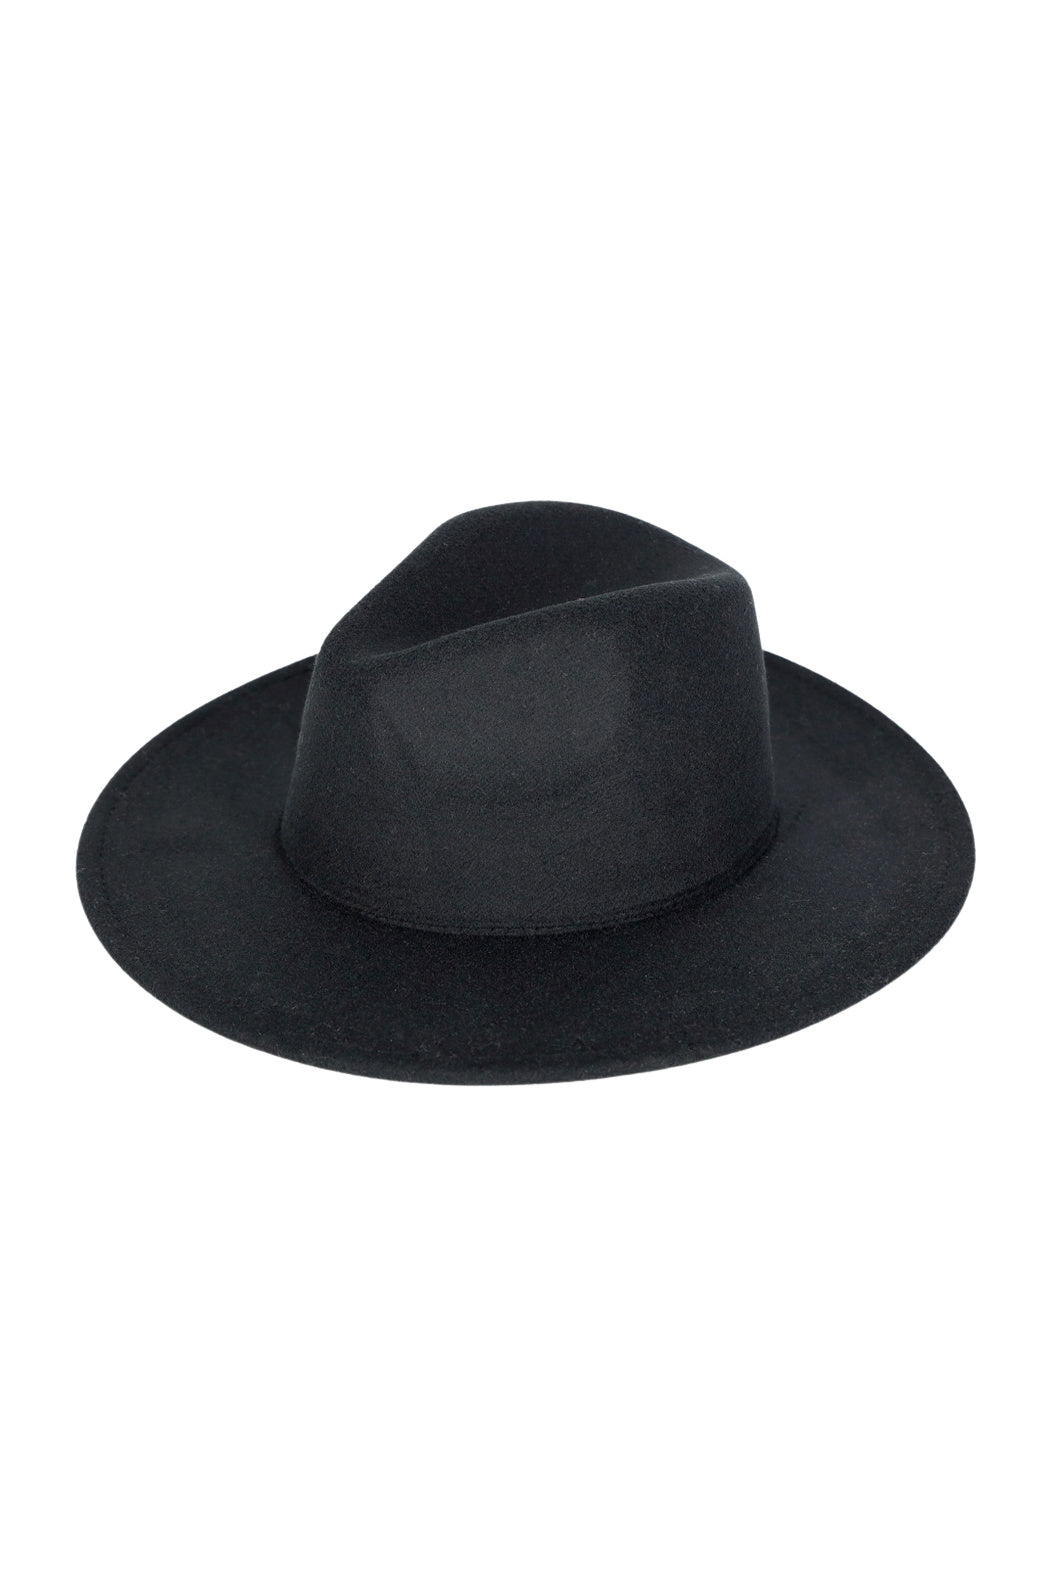 Your Way Felt Fedora - available in 10 colors